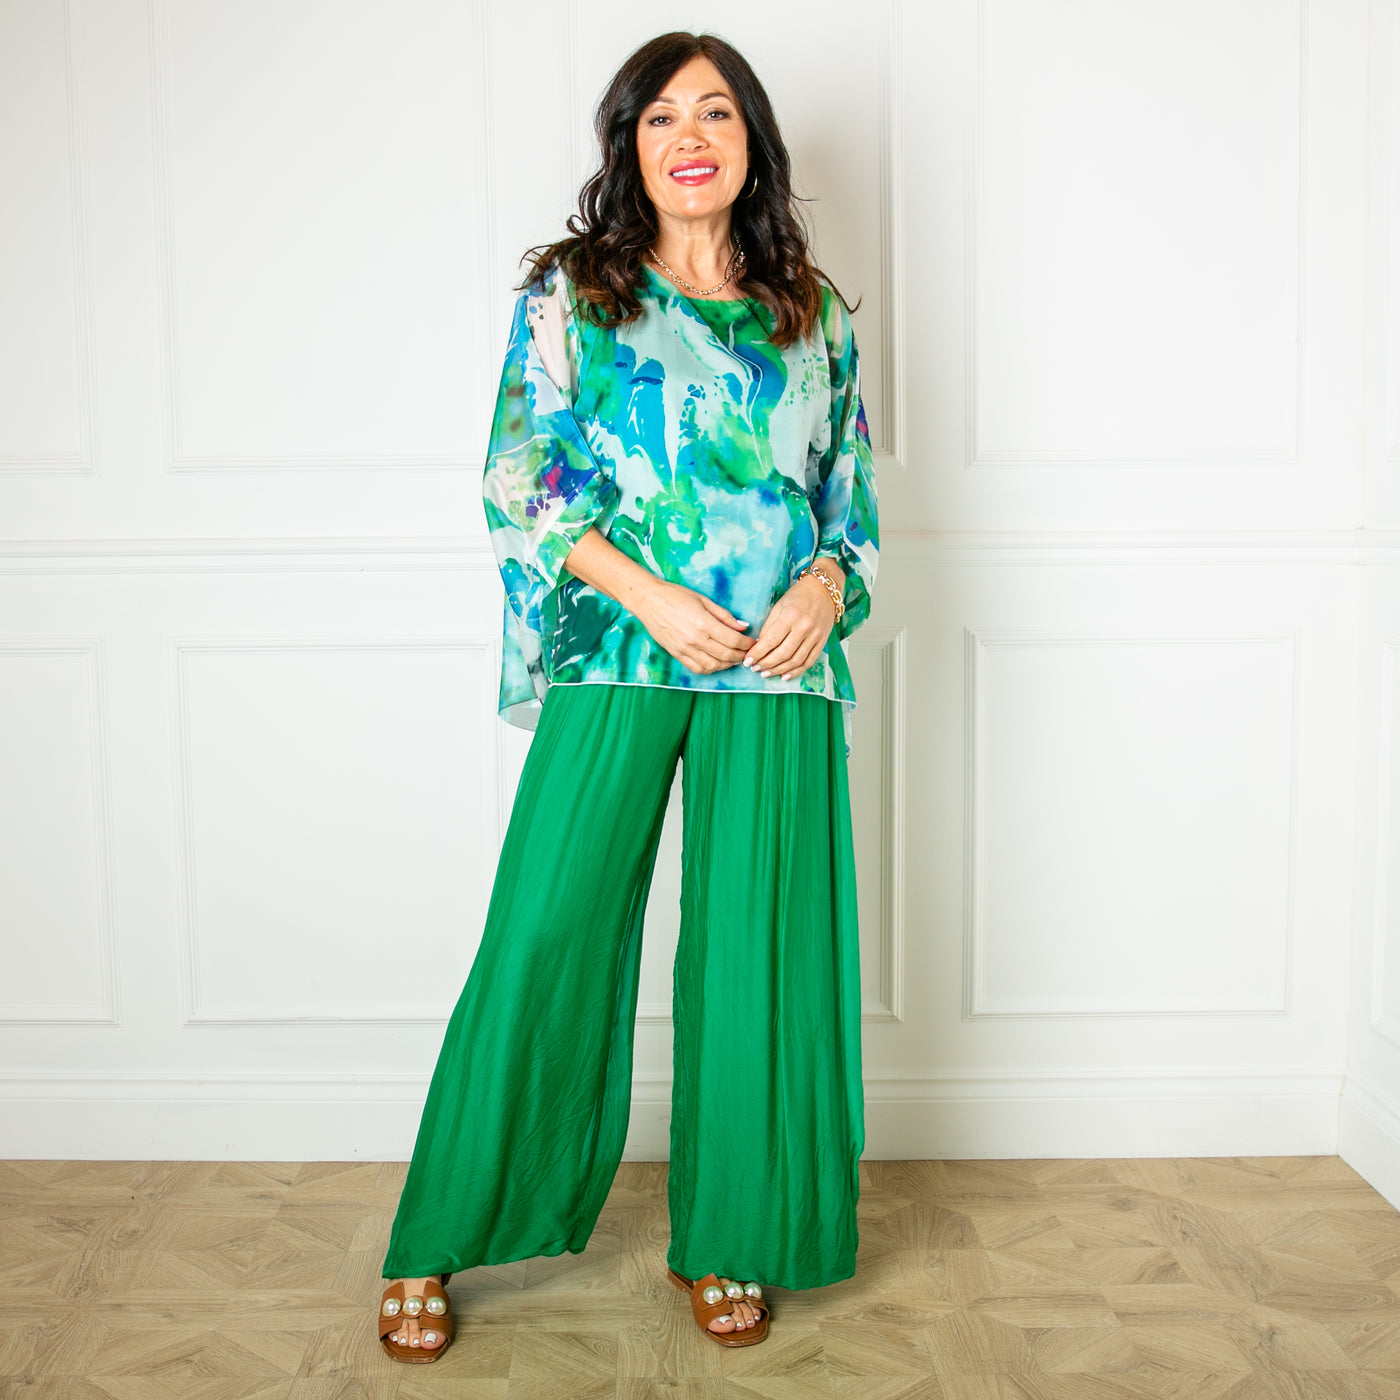 The emerald green Silk Blend Trousers which are lightweight and perfect for summer